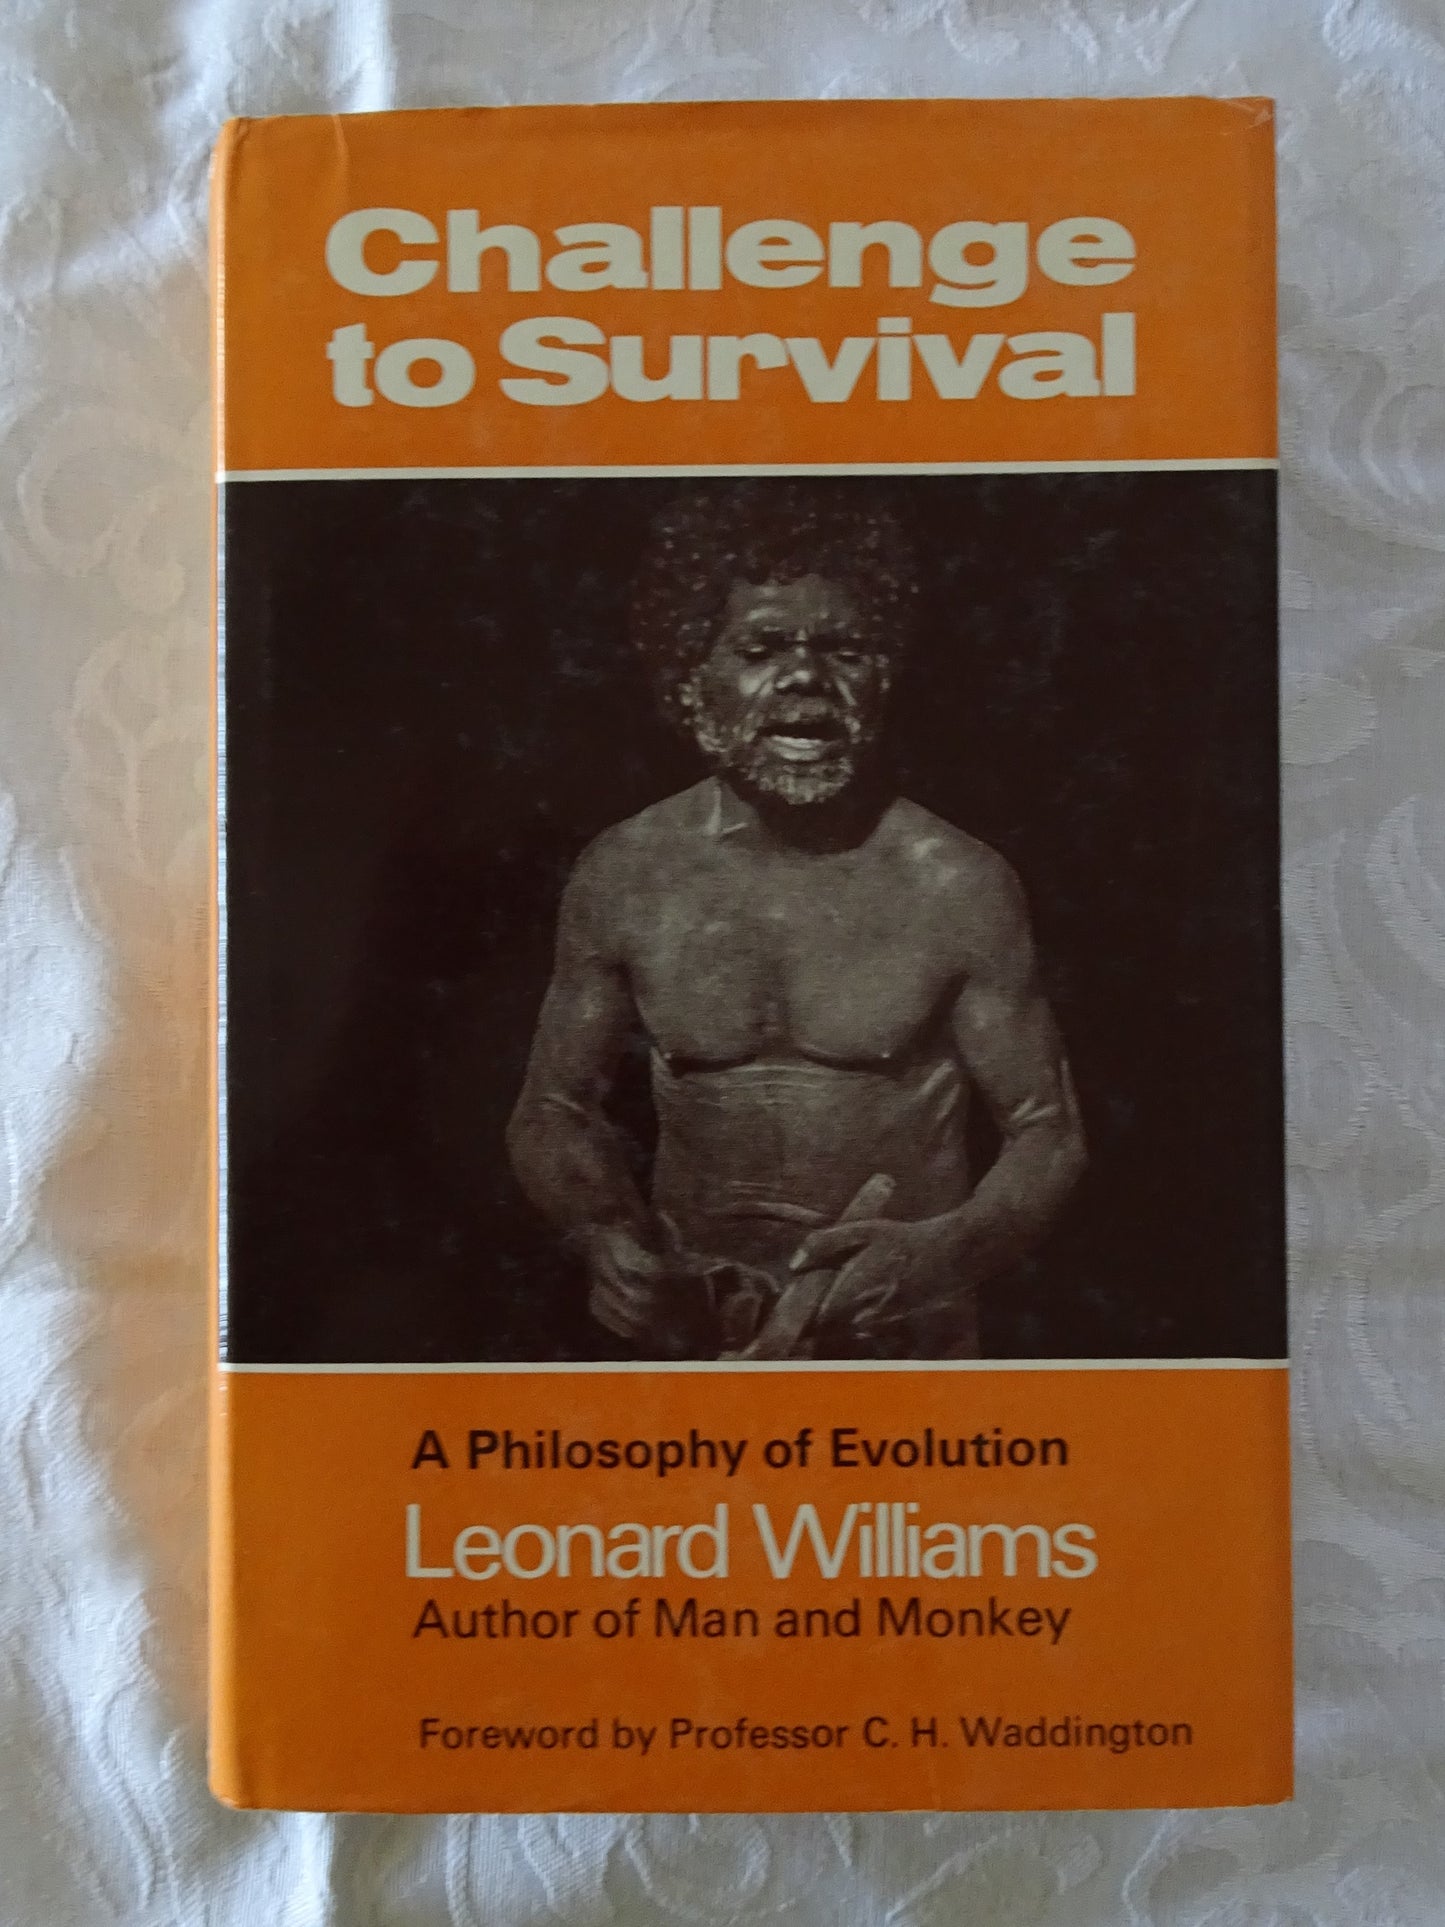 Challenge to Survival by Leonard Williams